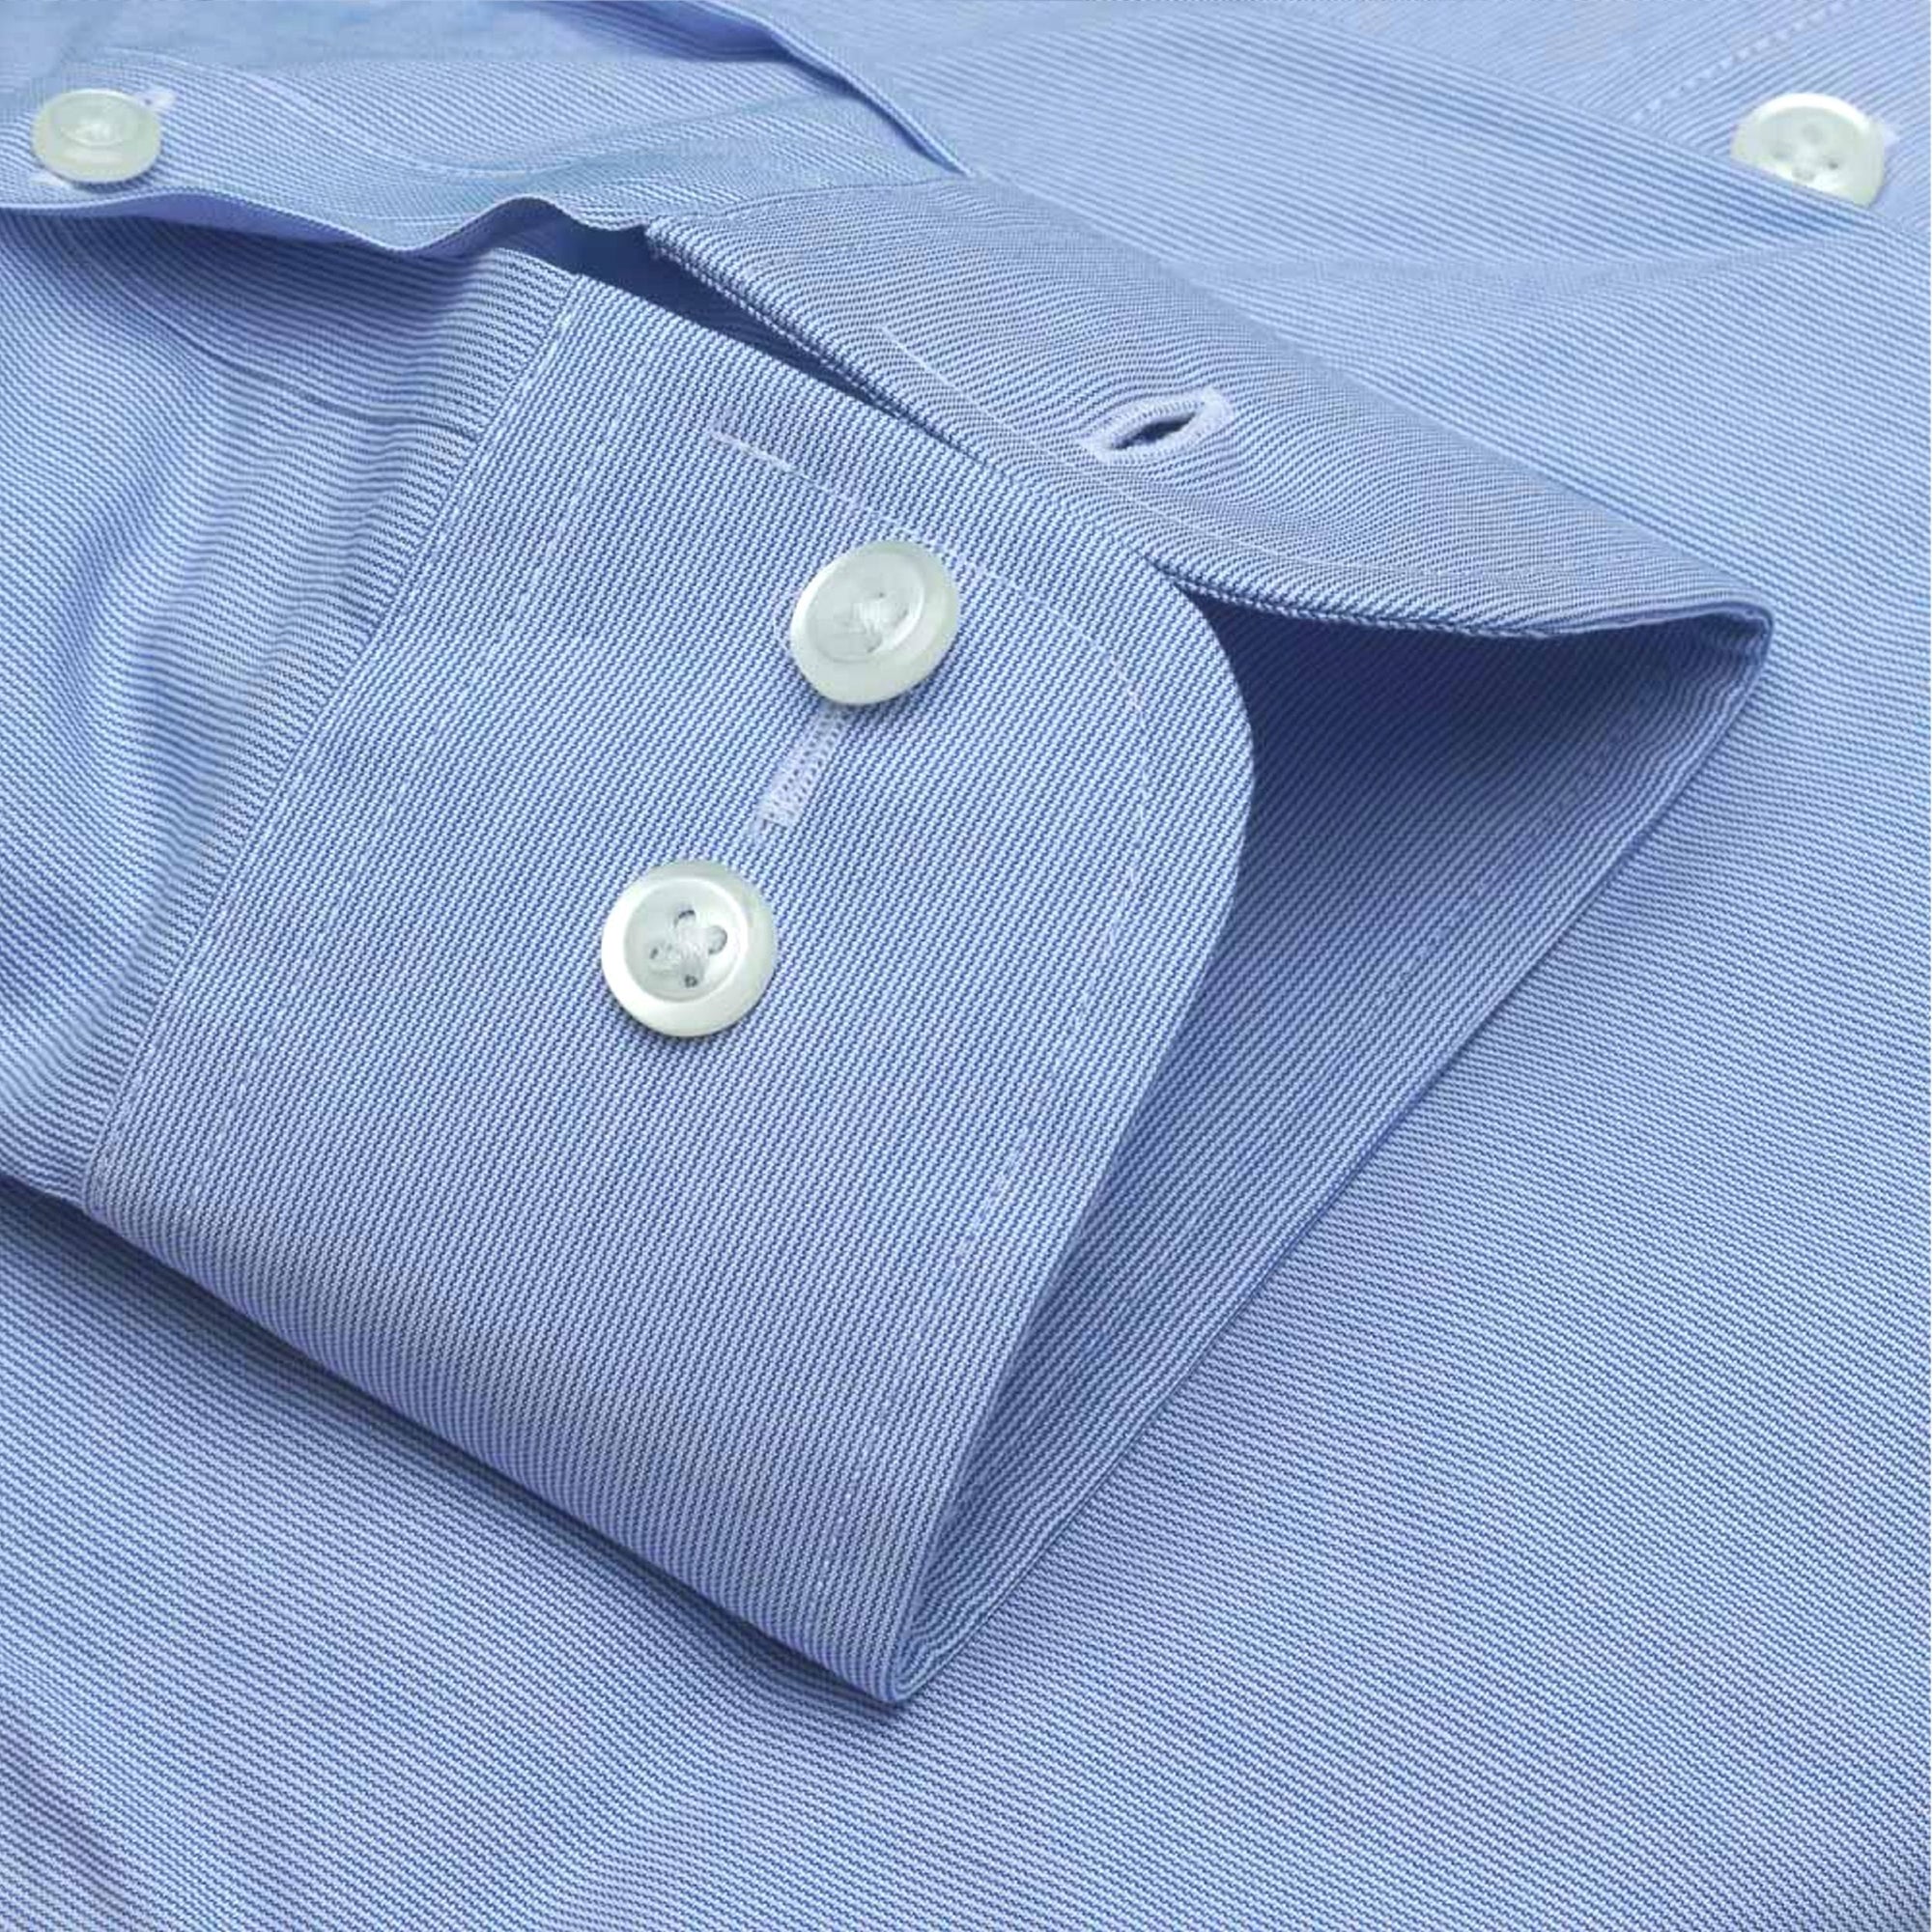 The Reagan - Wrinkle-Free Fine Line Stripe Cotton Dress Shirt with Button-Down Collar in Blue by Cooper & Stewart